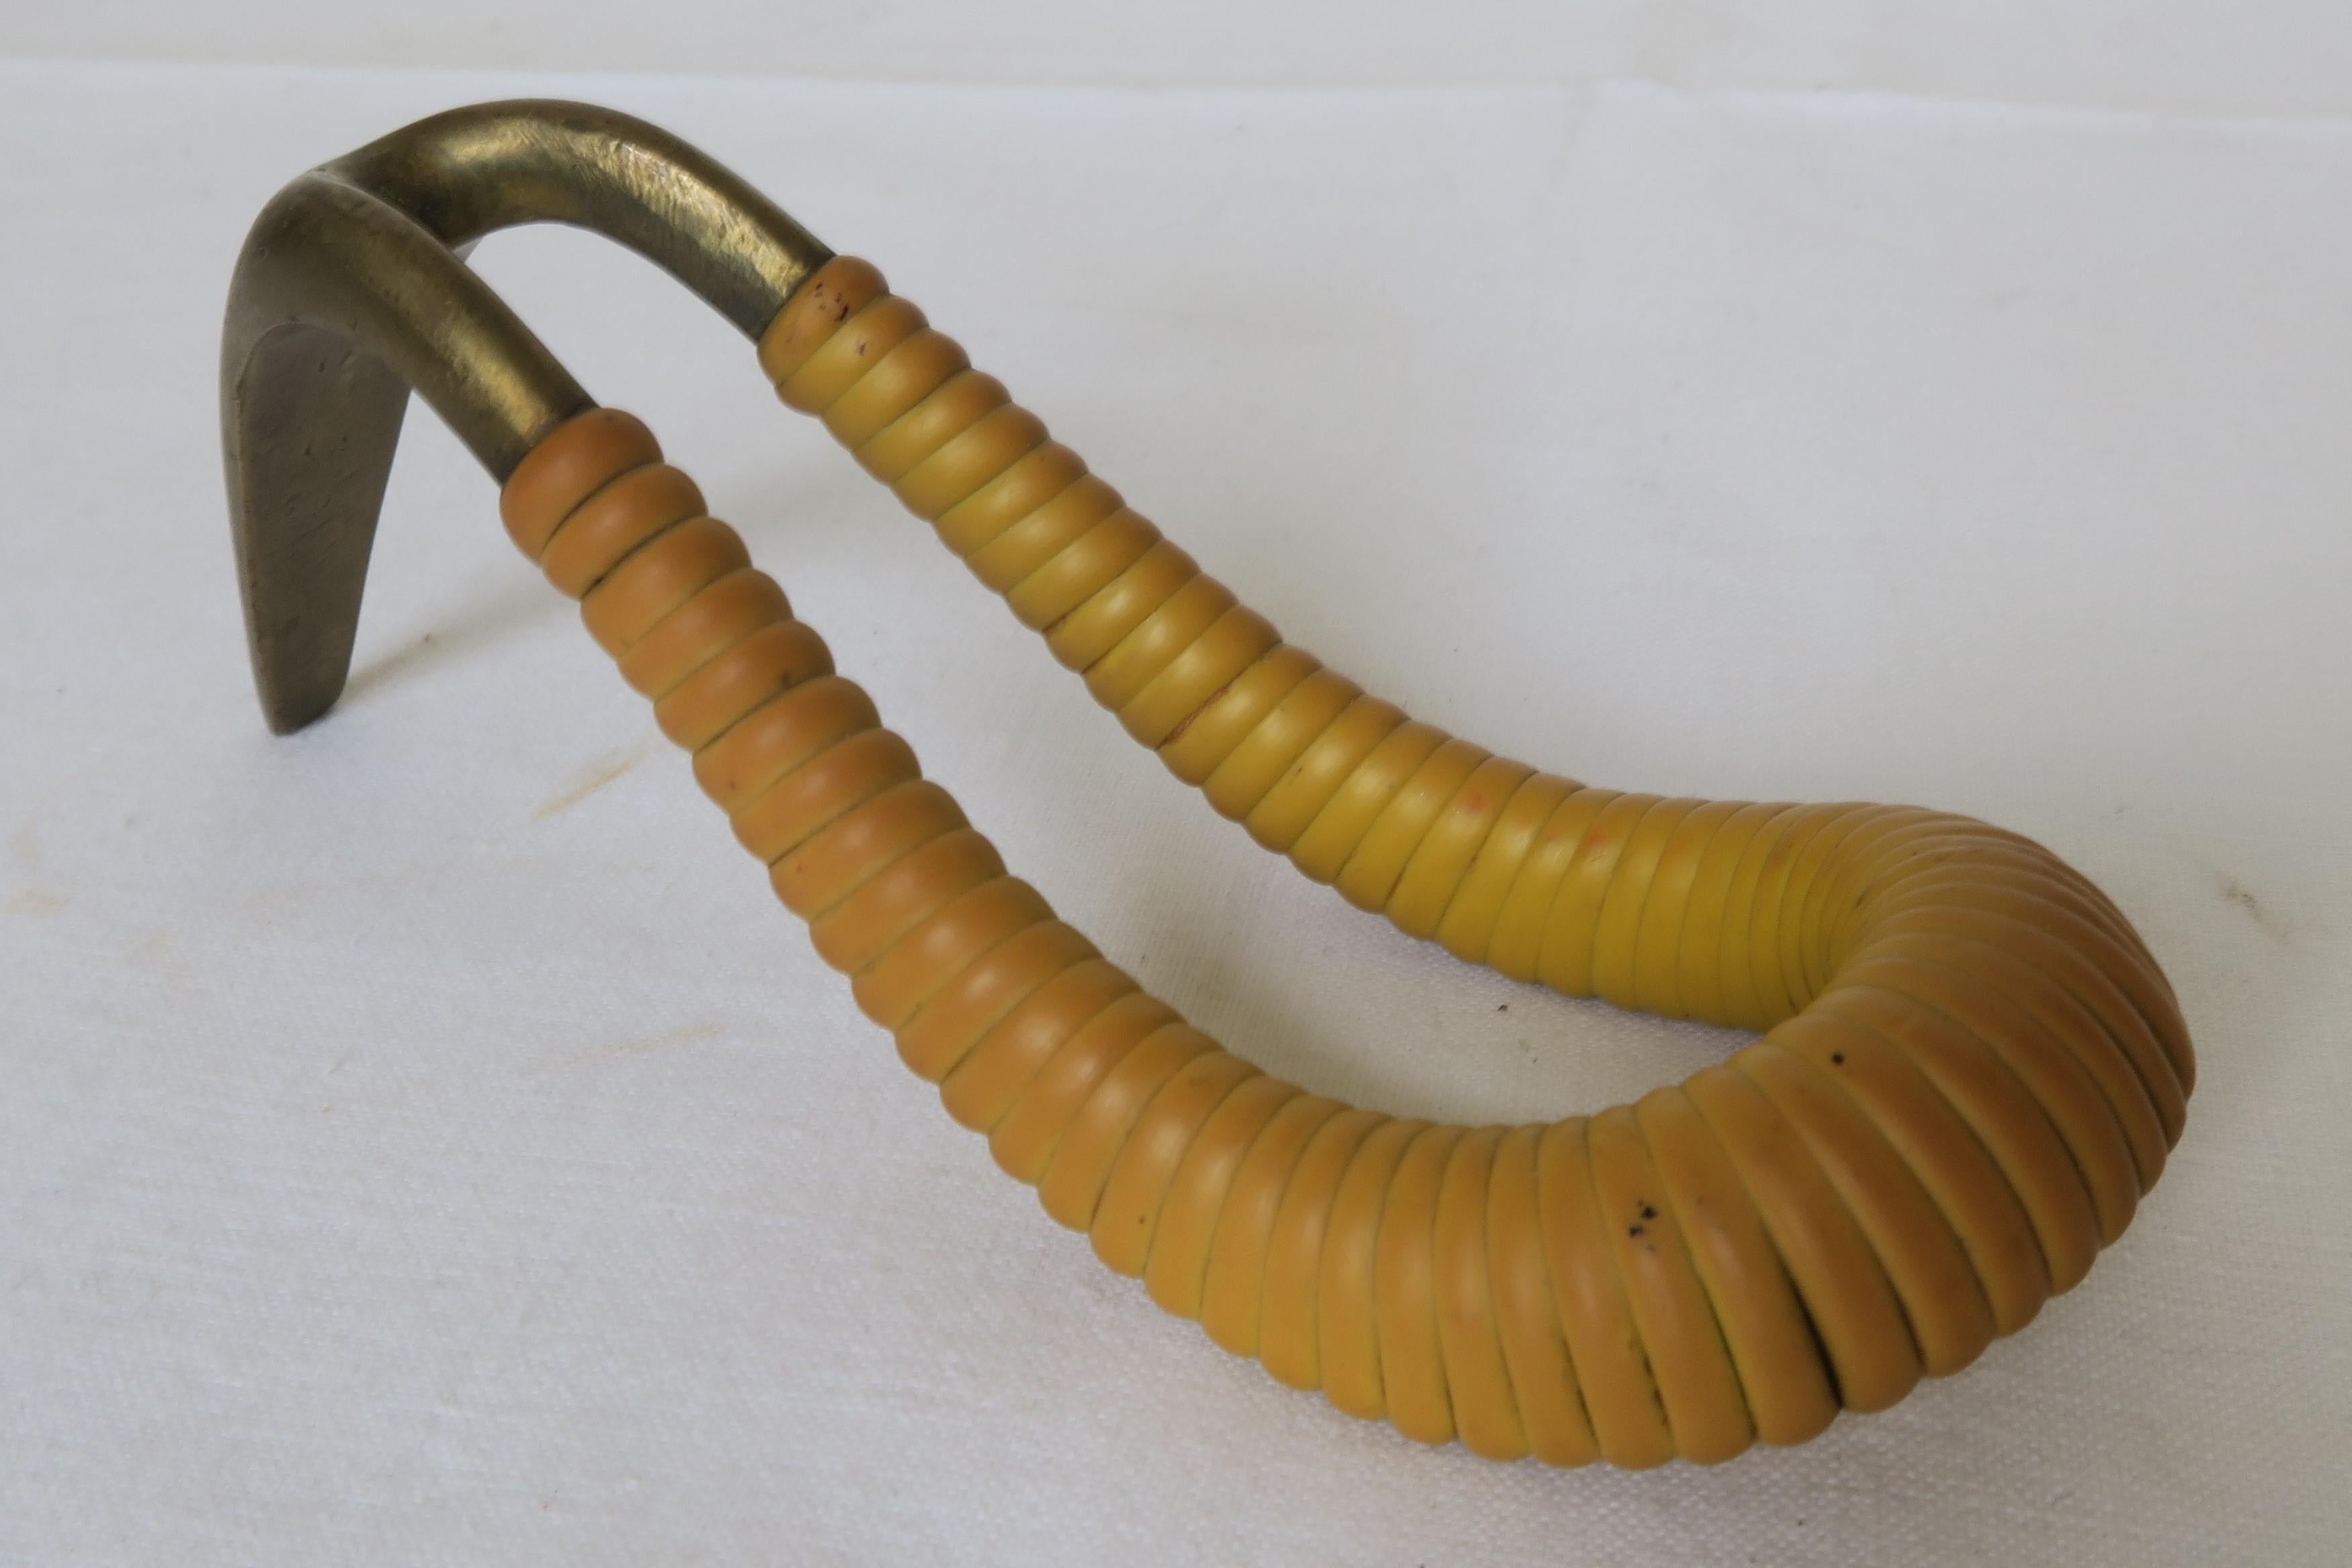 For sale is a beautiful decorative pipe rest. It was hand-crafted from brass and has been embellished with mustard yellow covering, that has been wrapped partly around the brass to prevent it from heating up or getting scorched. It was designed by